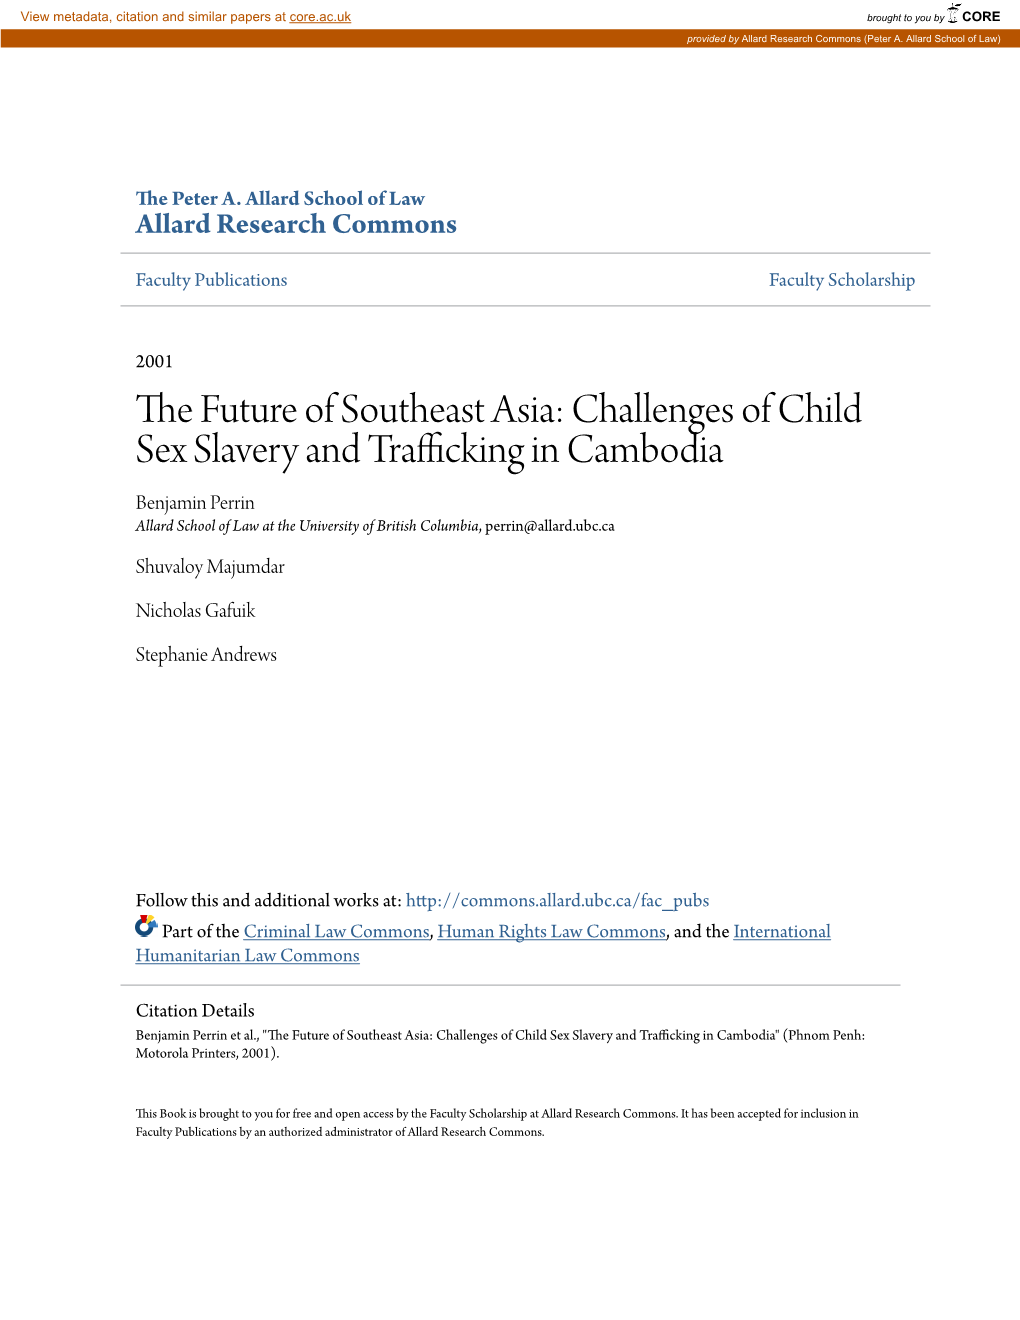 The Future of Southeast Asia: Challenges of Child Sex Slavery and Trafficking in Cambodia